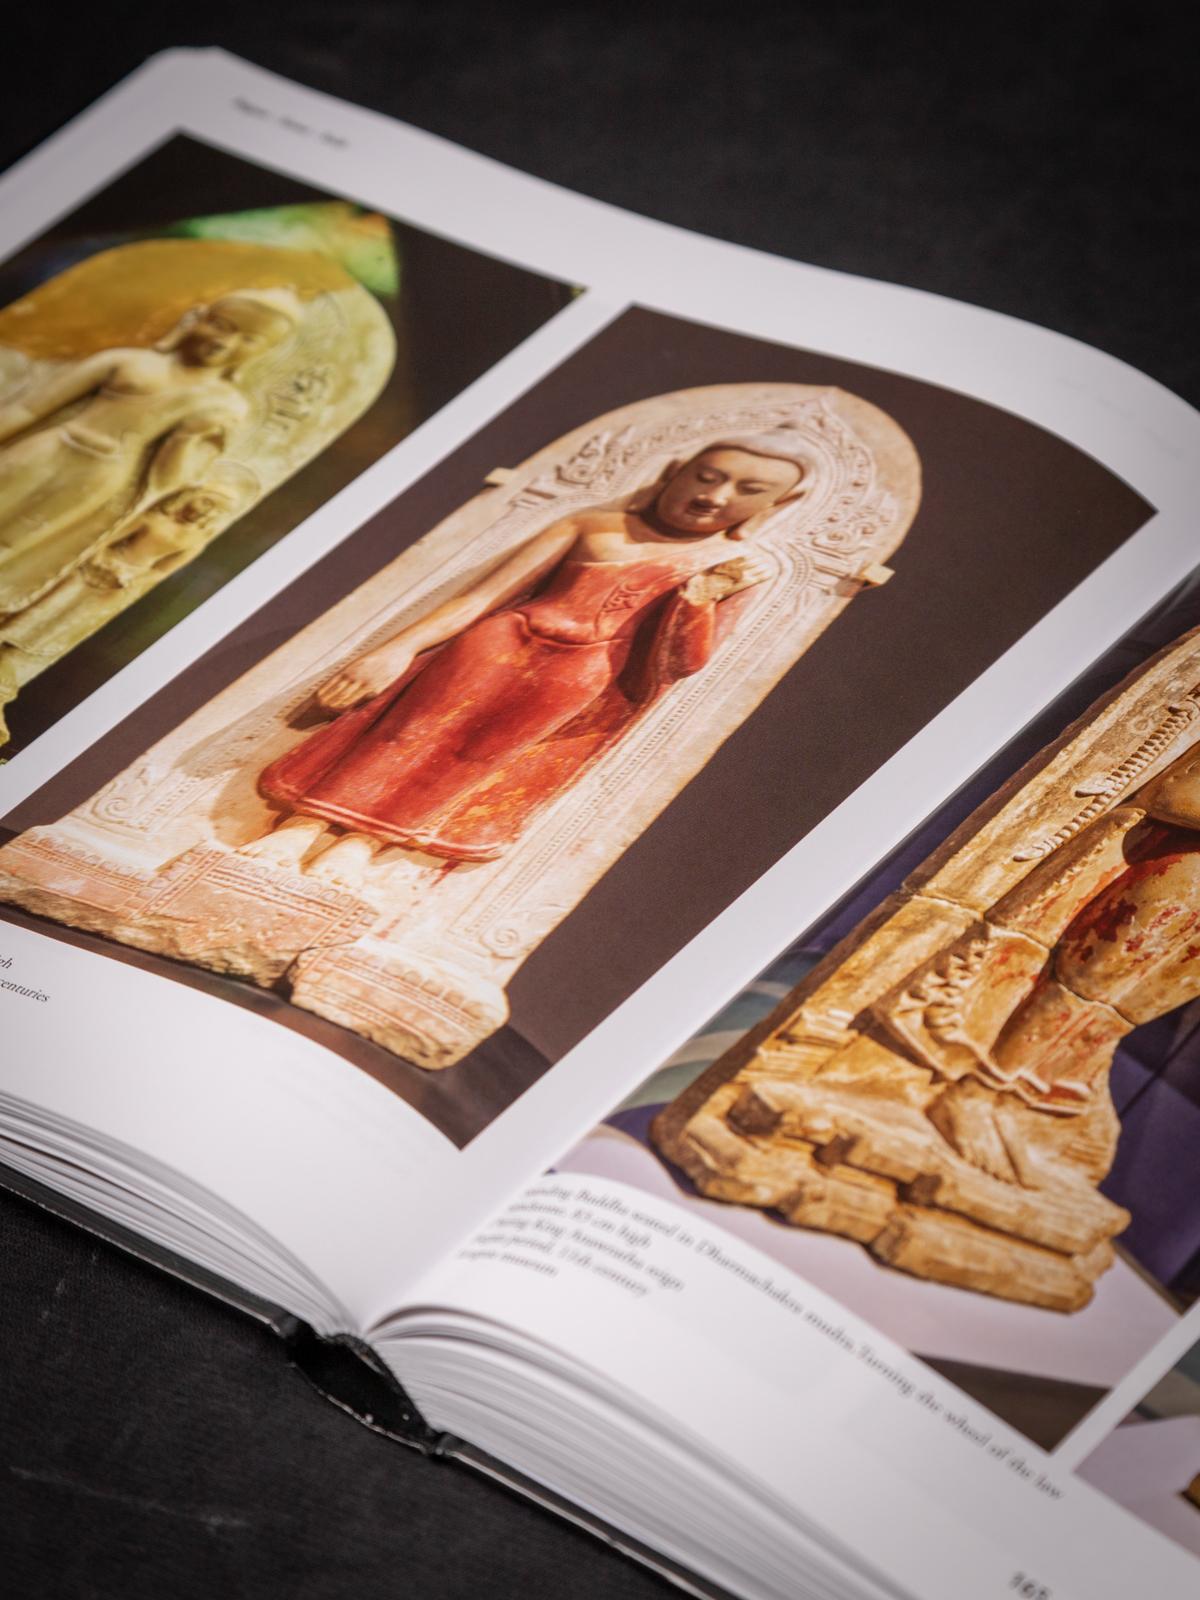 Book : Myanmar Buddhist Imagery by Denis Lepage from Belgium For Sale 13